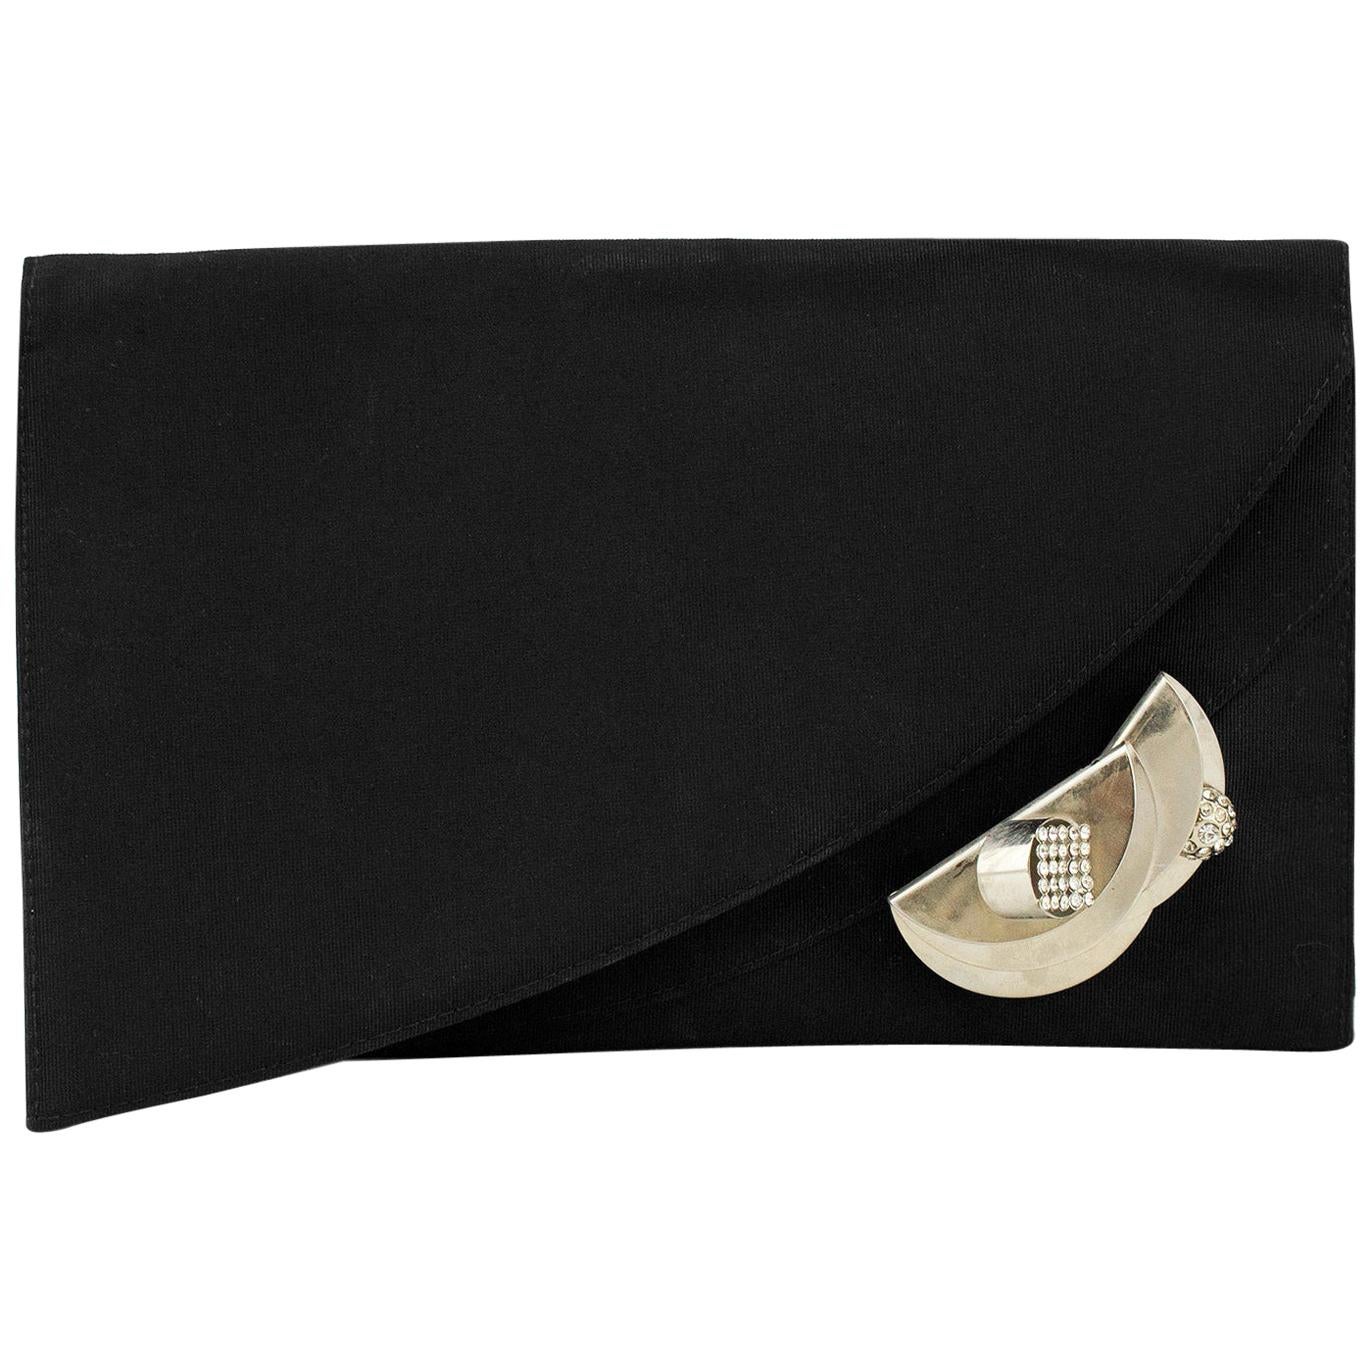 1990s Gianni Versace Couture Black Grosgrain Clutch with Silver Detail 